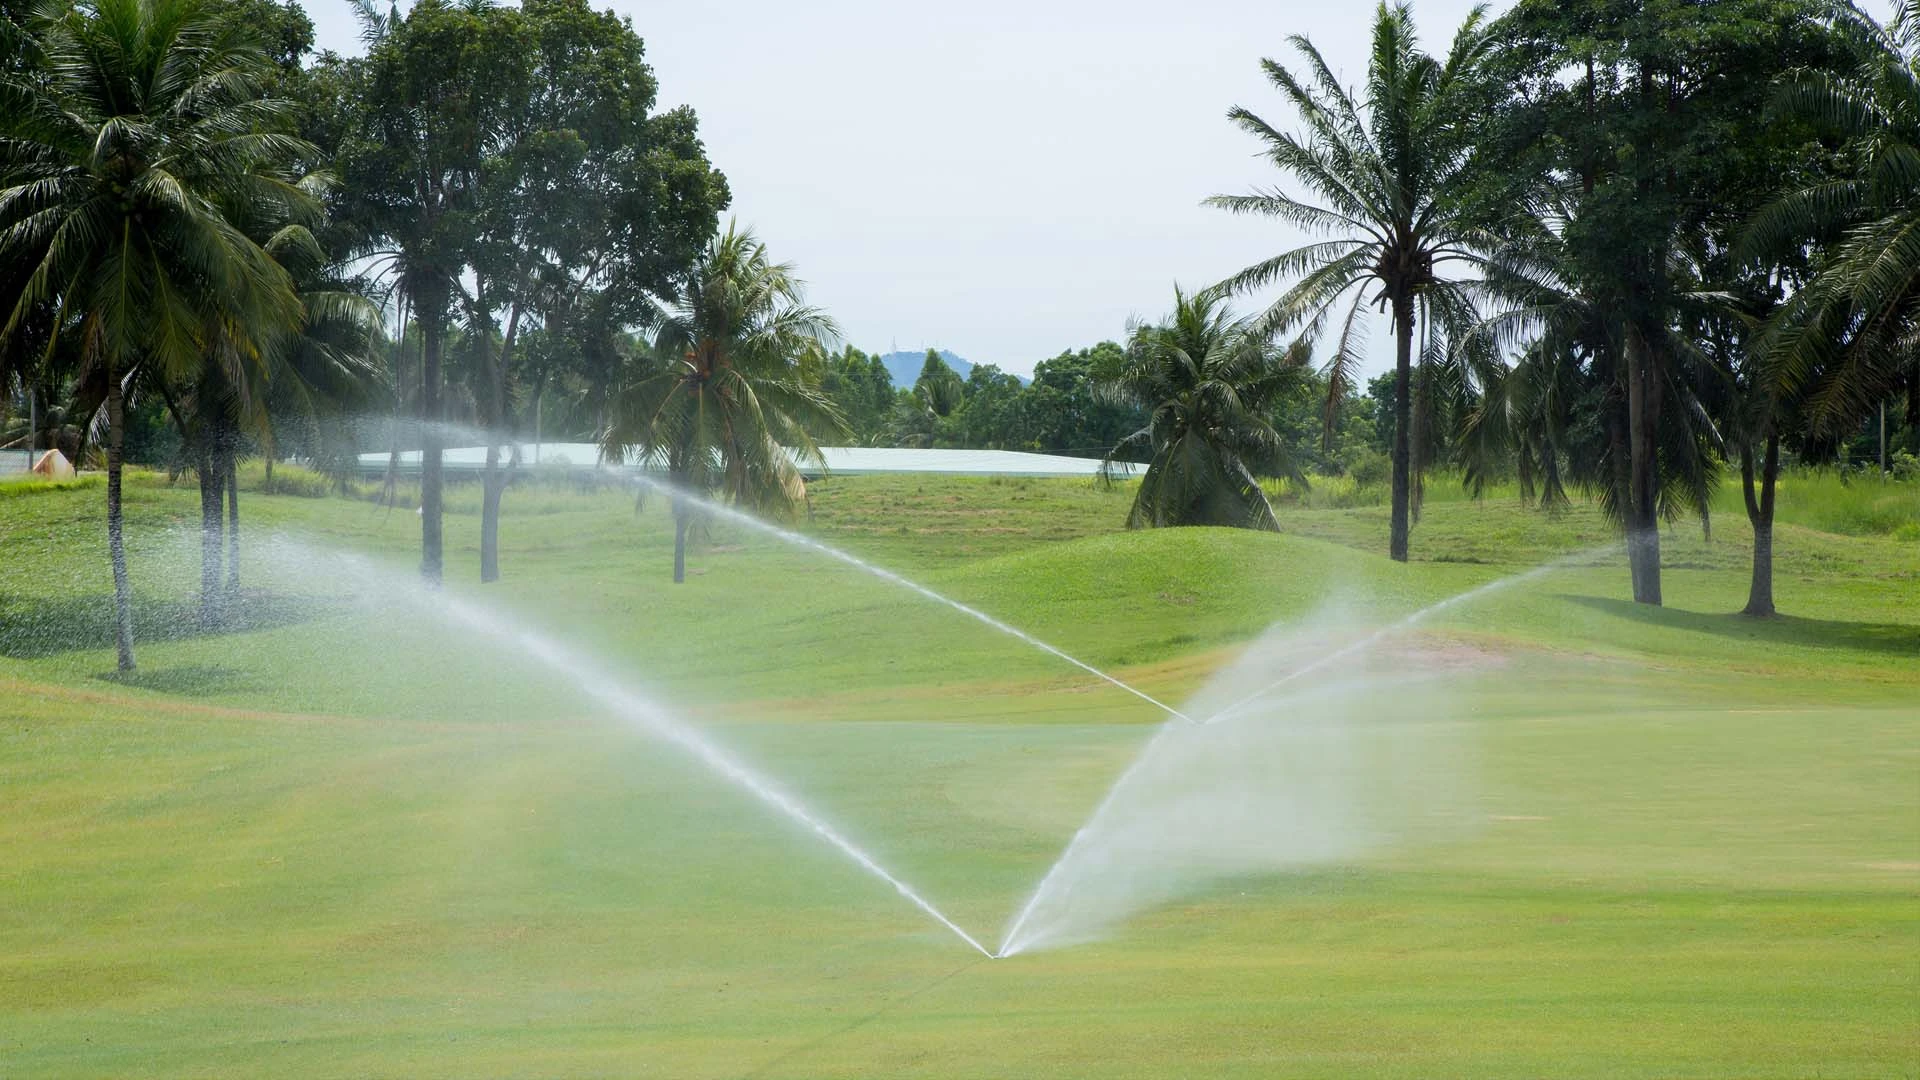 Golf course with newly repaired irrigation systems.